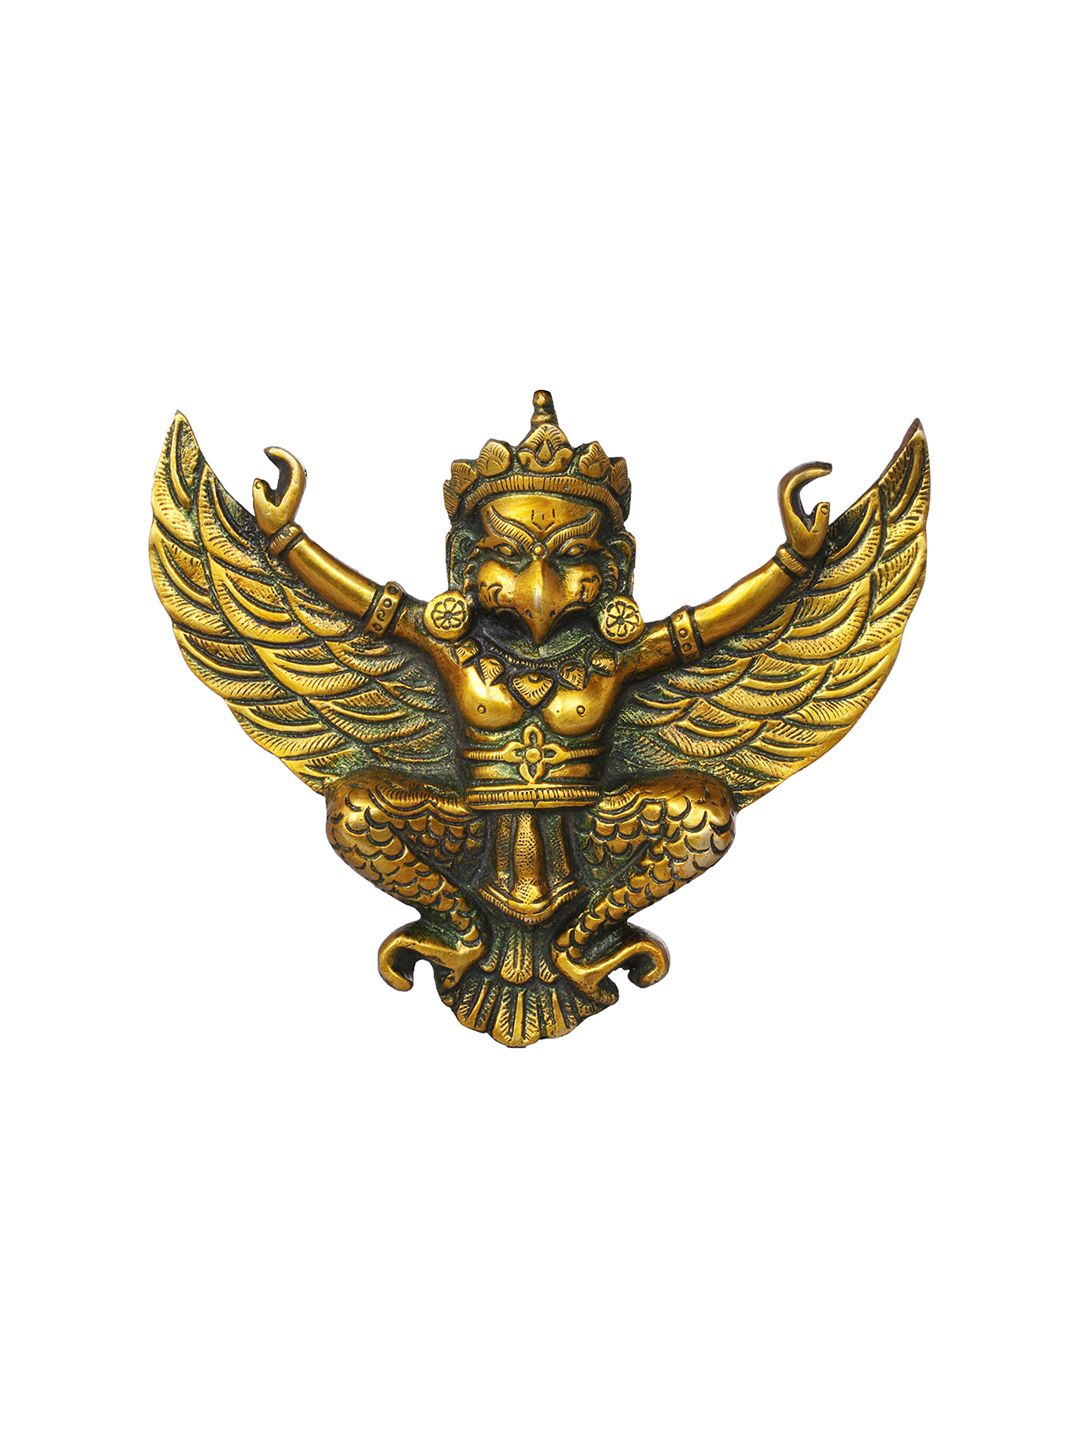 Exotic India Gold-Toned Hand-Made Garuda Wall Decor Price in India